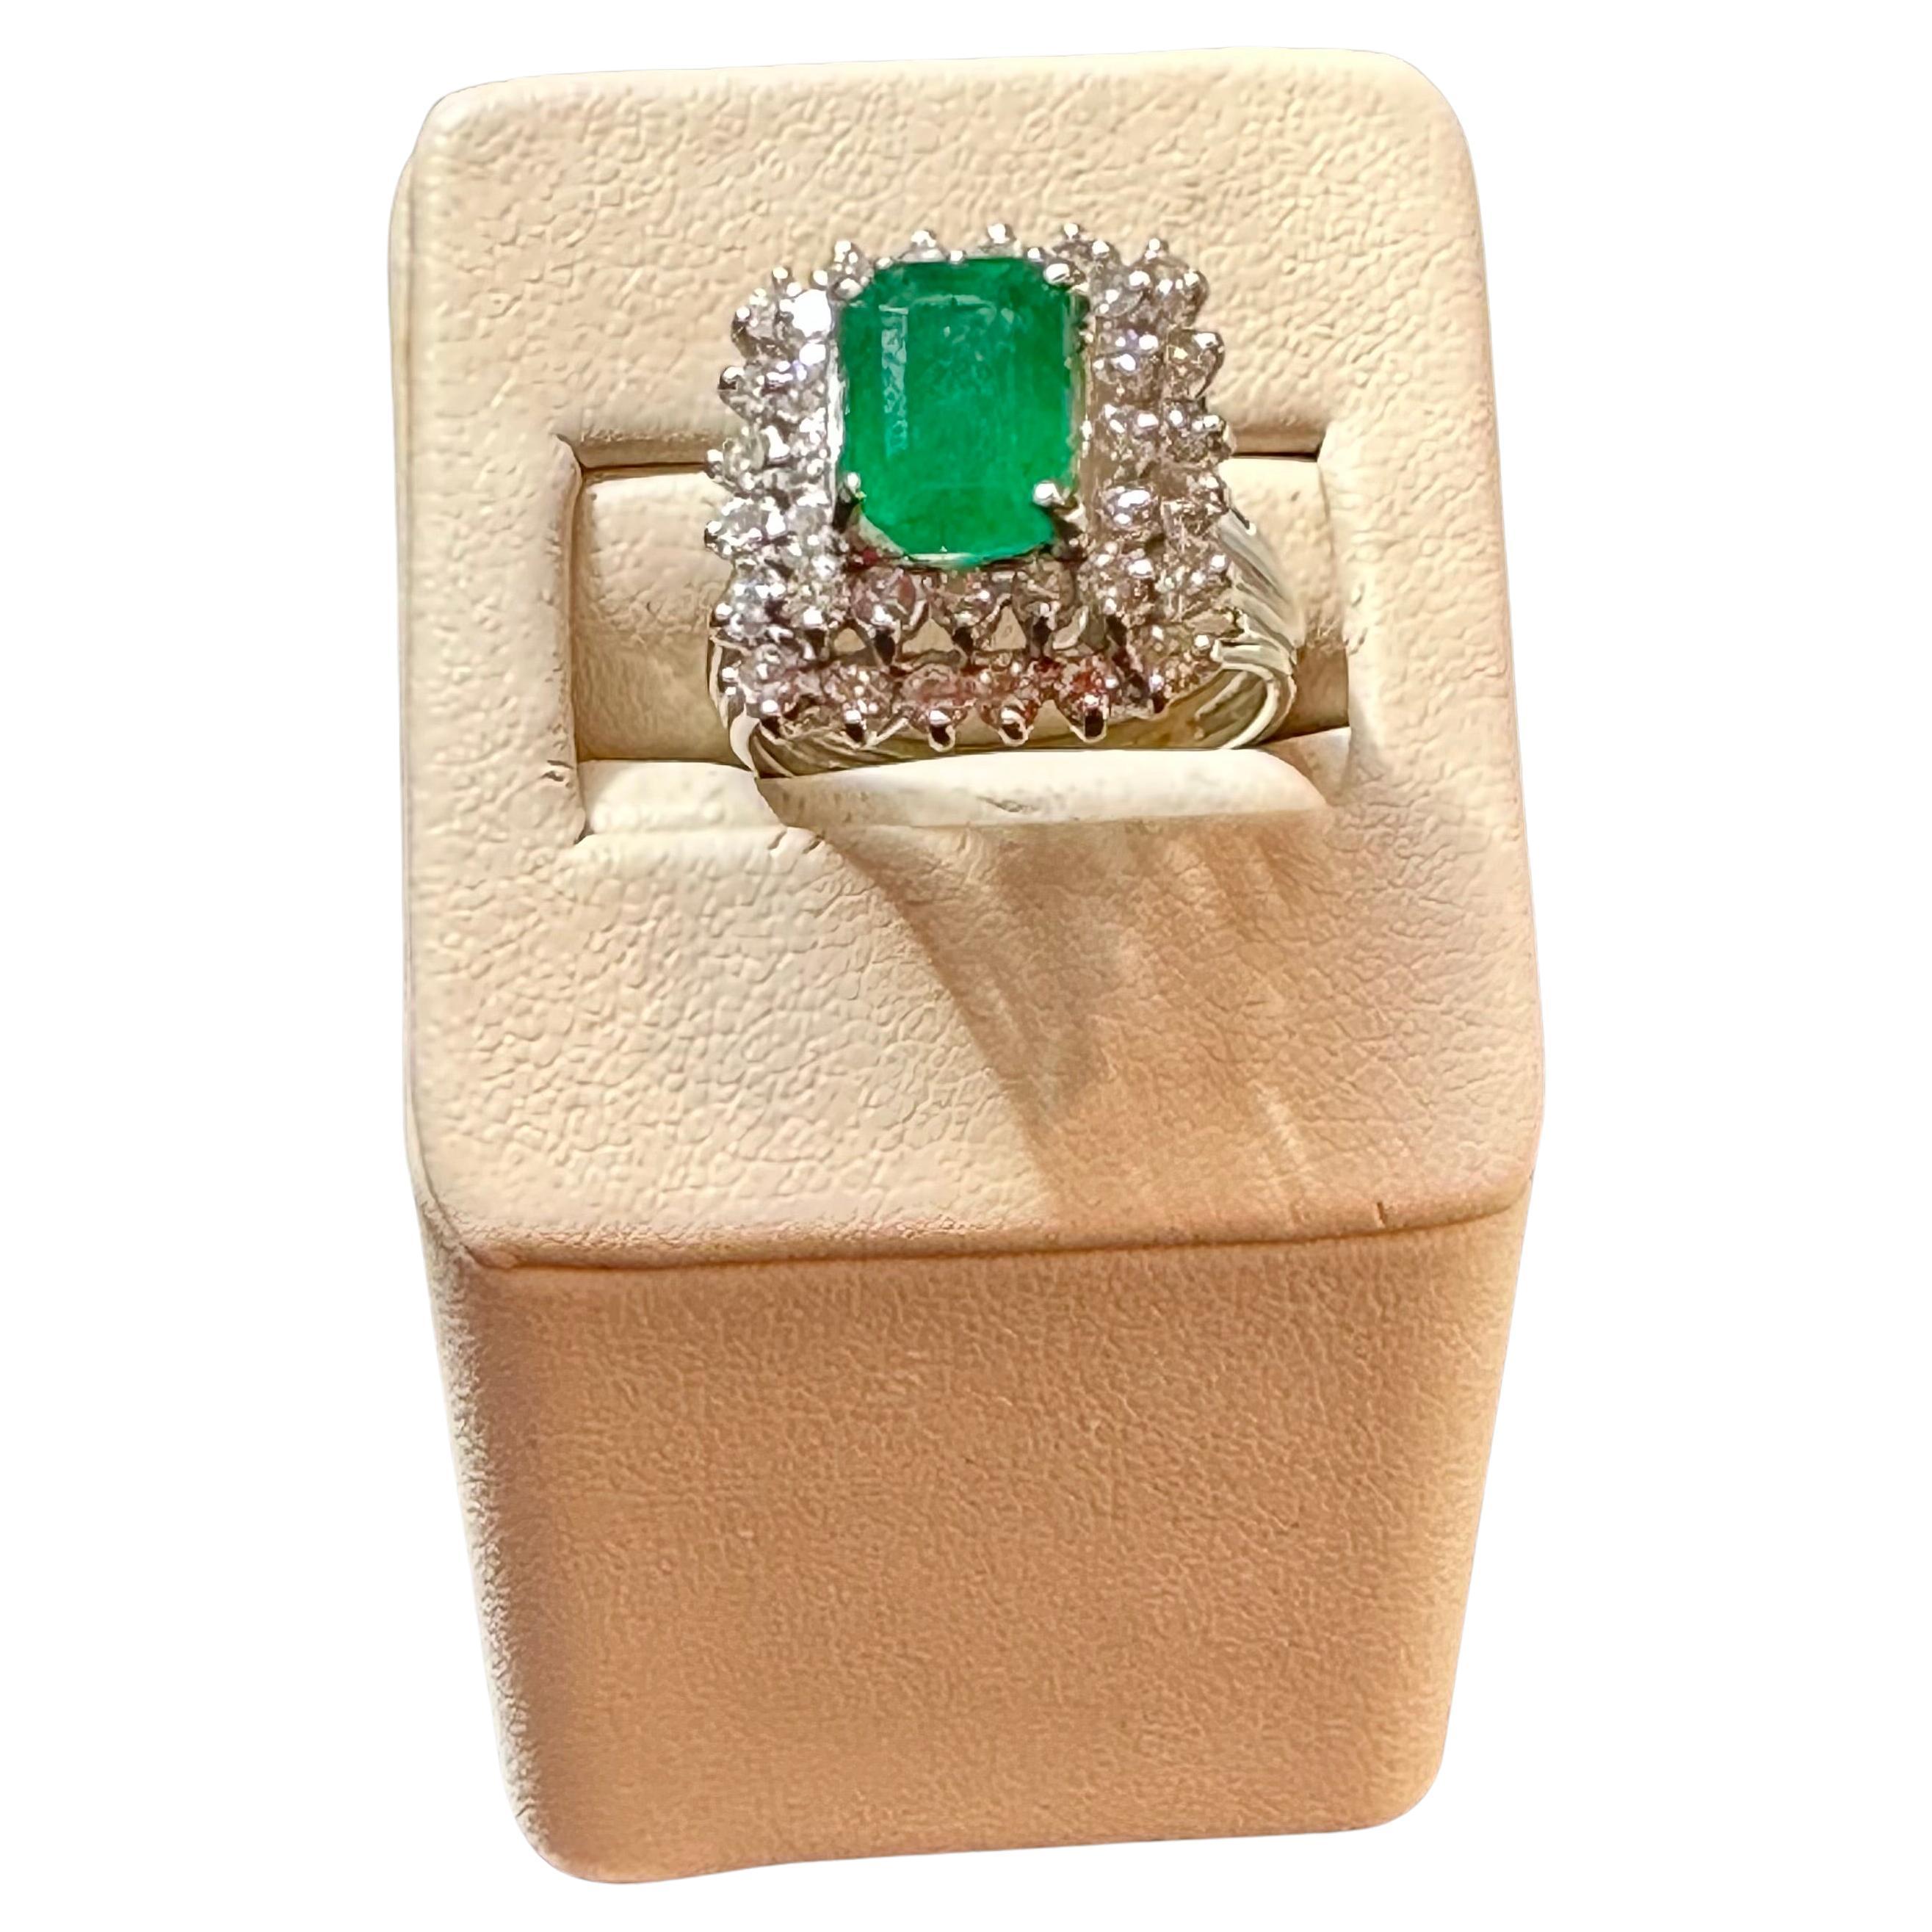 Introducing a breathtaking classic ring featuring a 3-carat emerald cut emerald and a pair of dazzling 2-carat diamonds, all set in 14 karat white gold. The emerald boasts an exquisite and highly sought-after color, showcasing exceptional quality